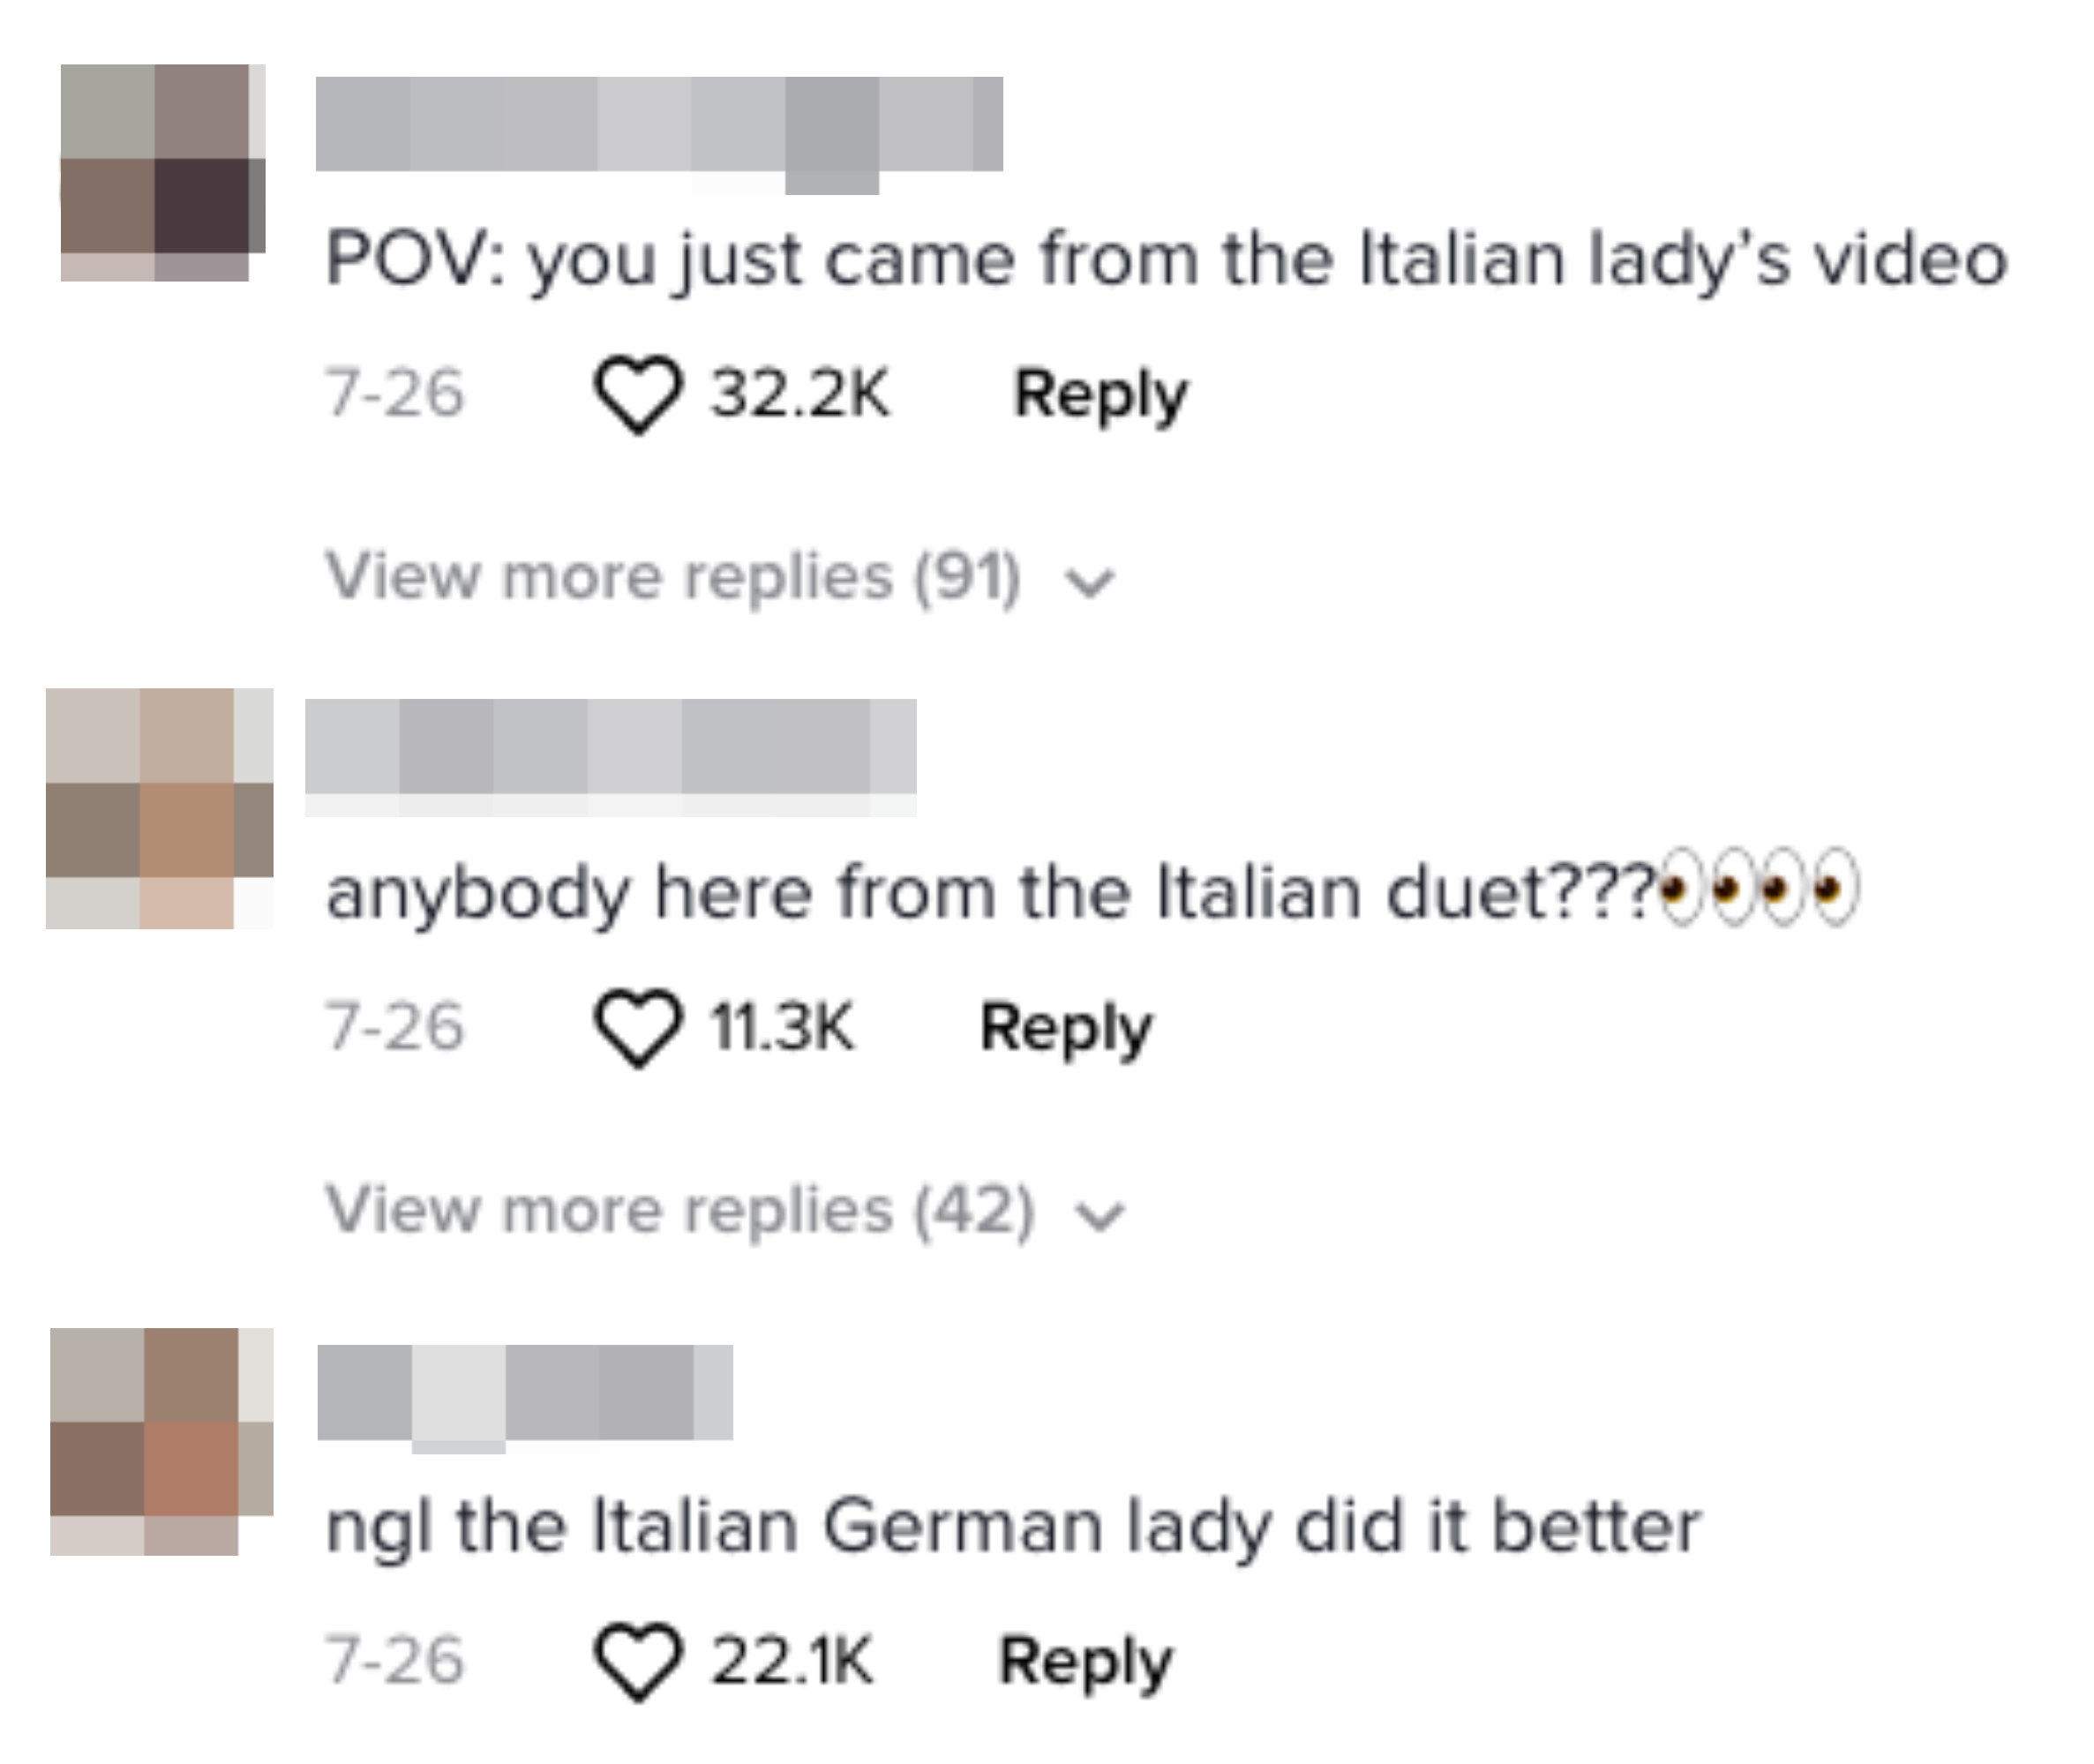 Comments including &quot;ngl the Italian German lady did it better&quot; and &quot;POV: you just came from the Italian lady&#x27;s video&quot;